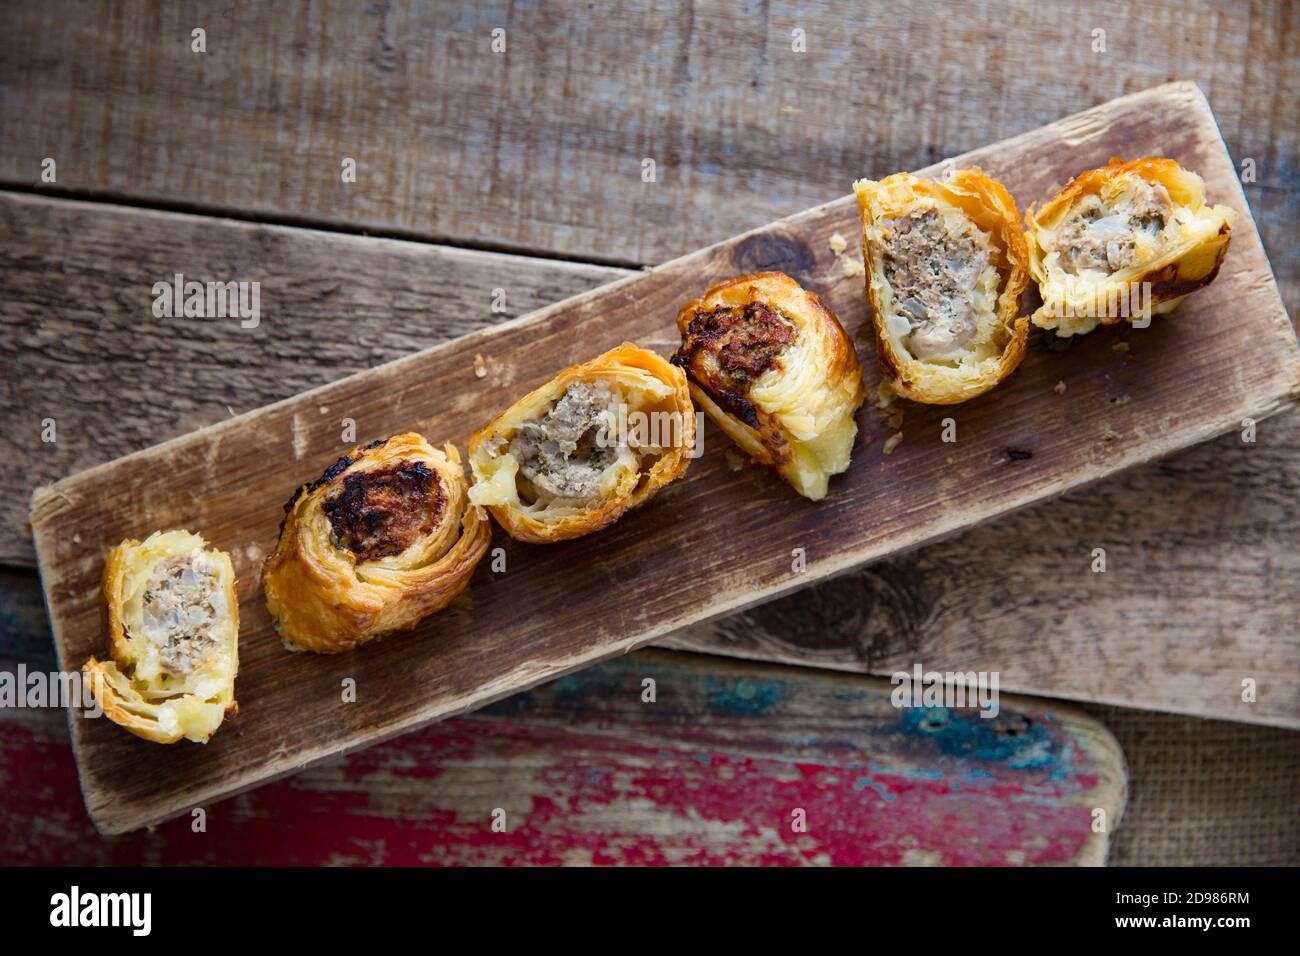 Pheasant sausage rolls made from minced pork and minced pheasant and herbs and spices. Made from a pheasant shot on a small driven shoot using a shotg Stock Photo